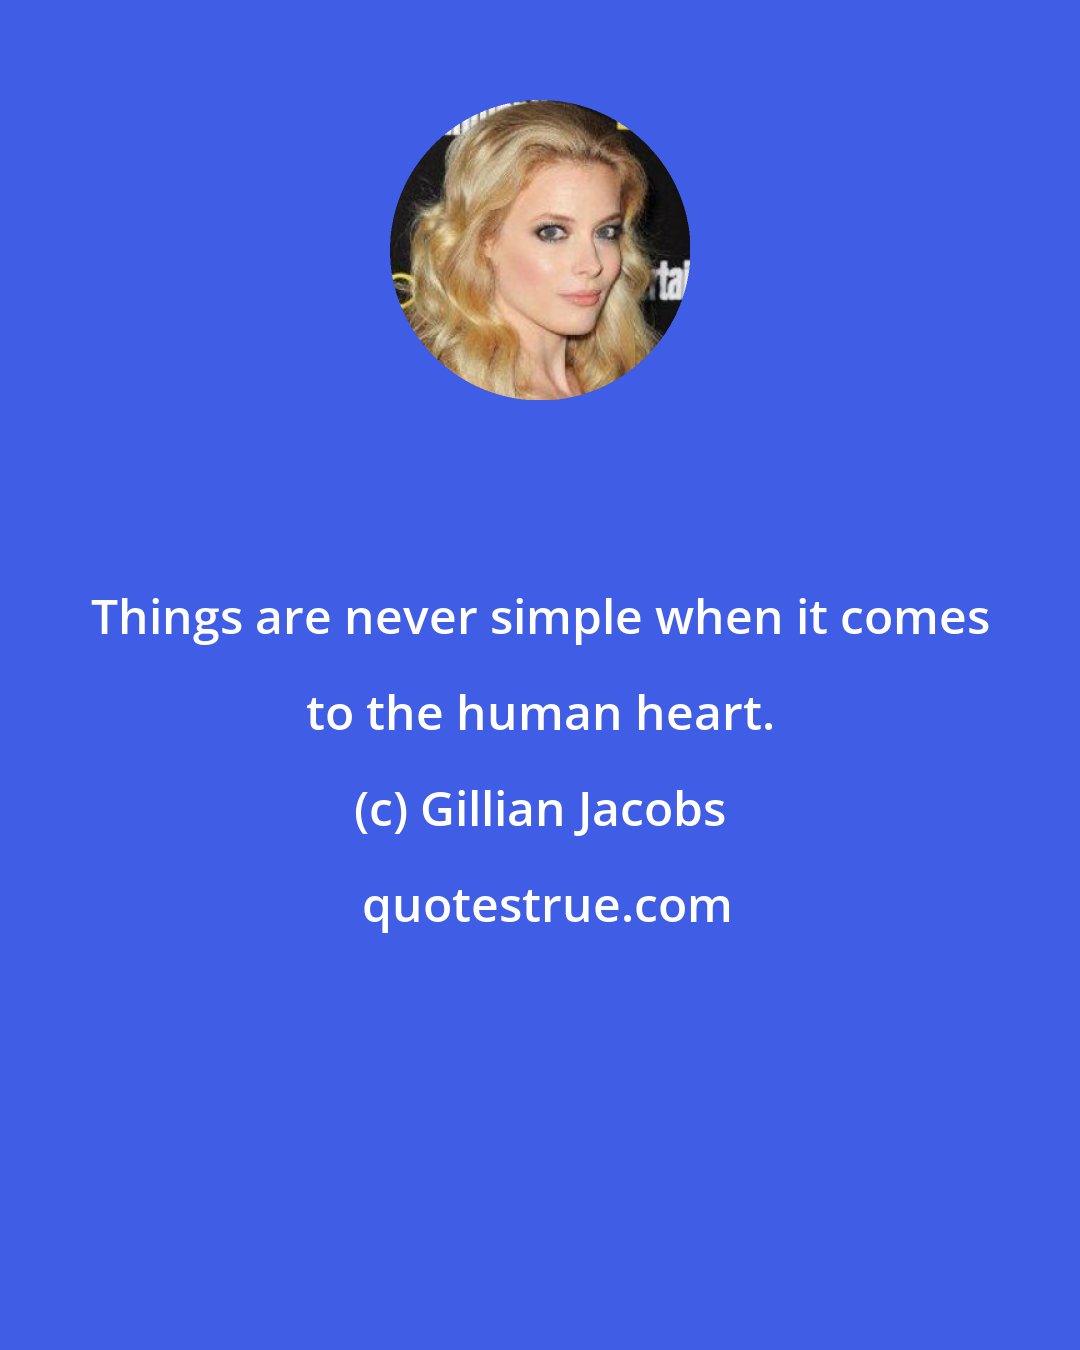 Gillian Jacobs: Things are never simple when it comes to the human heart.